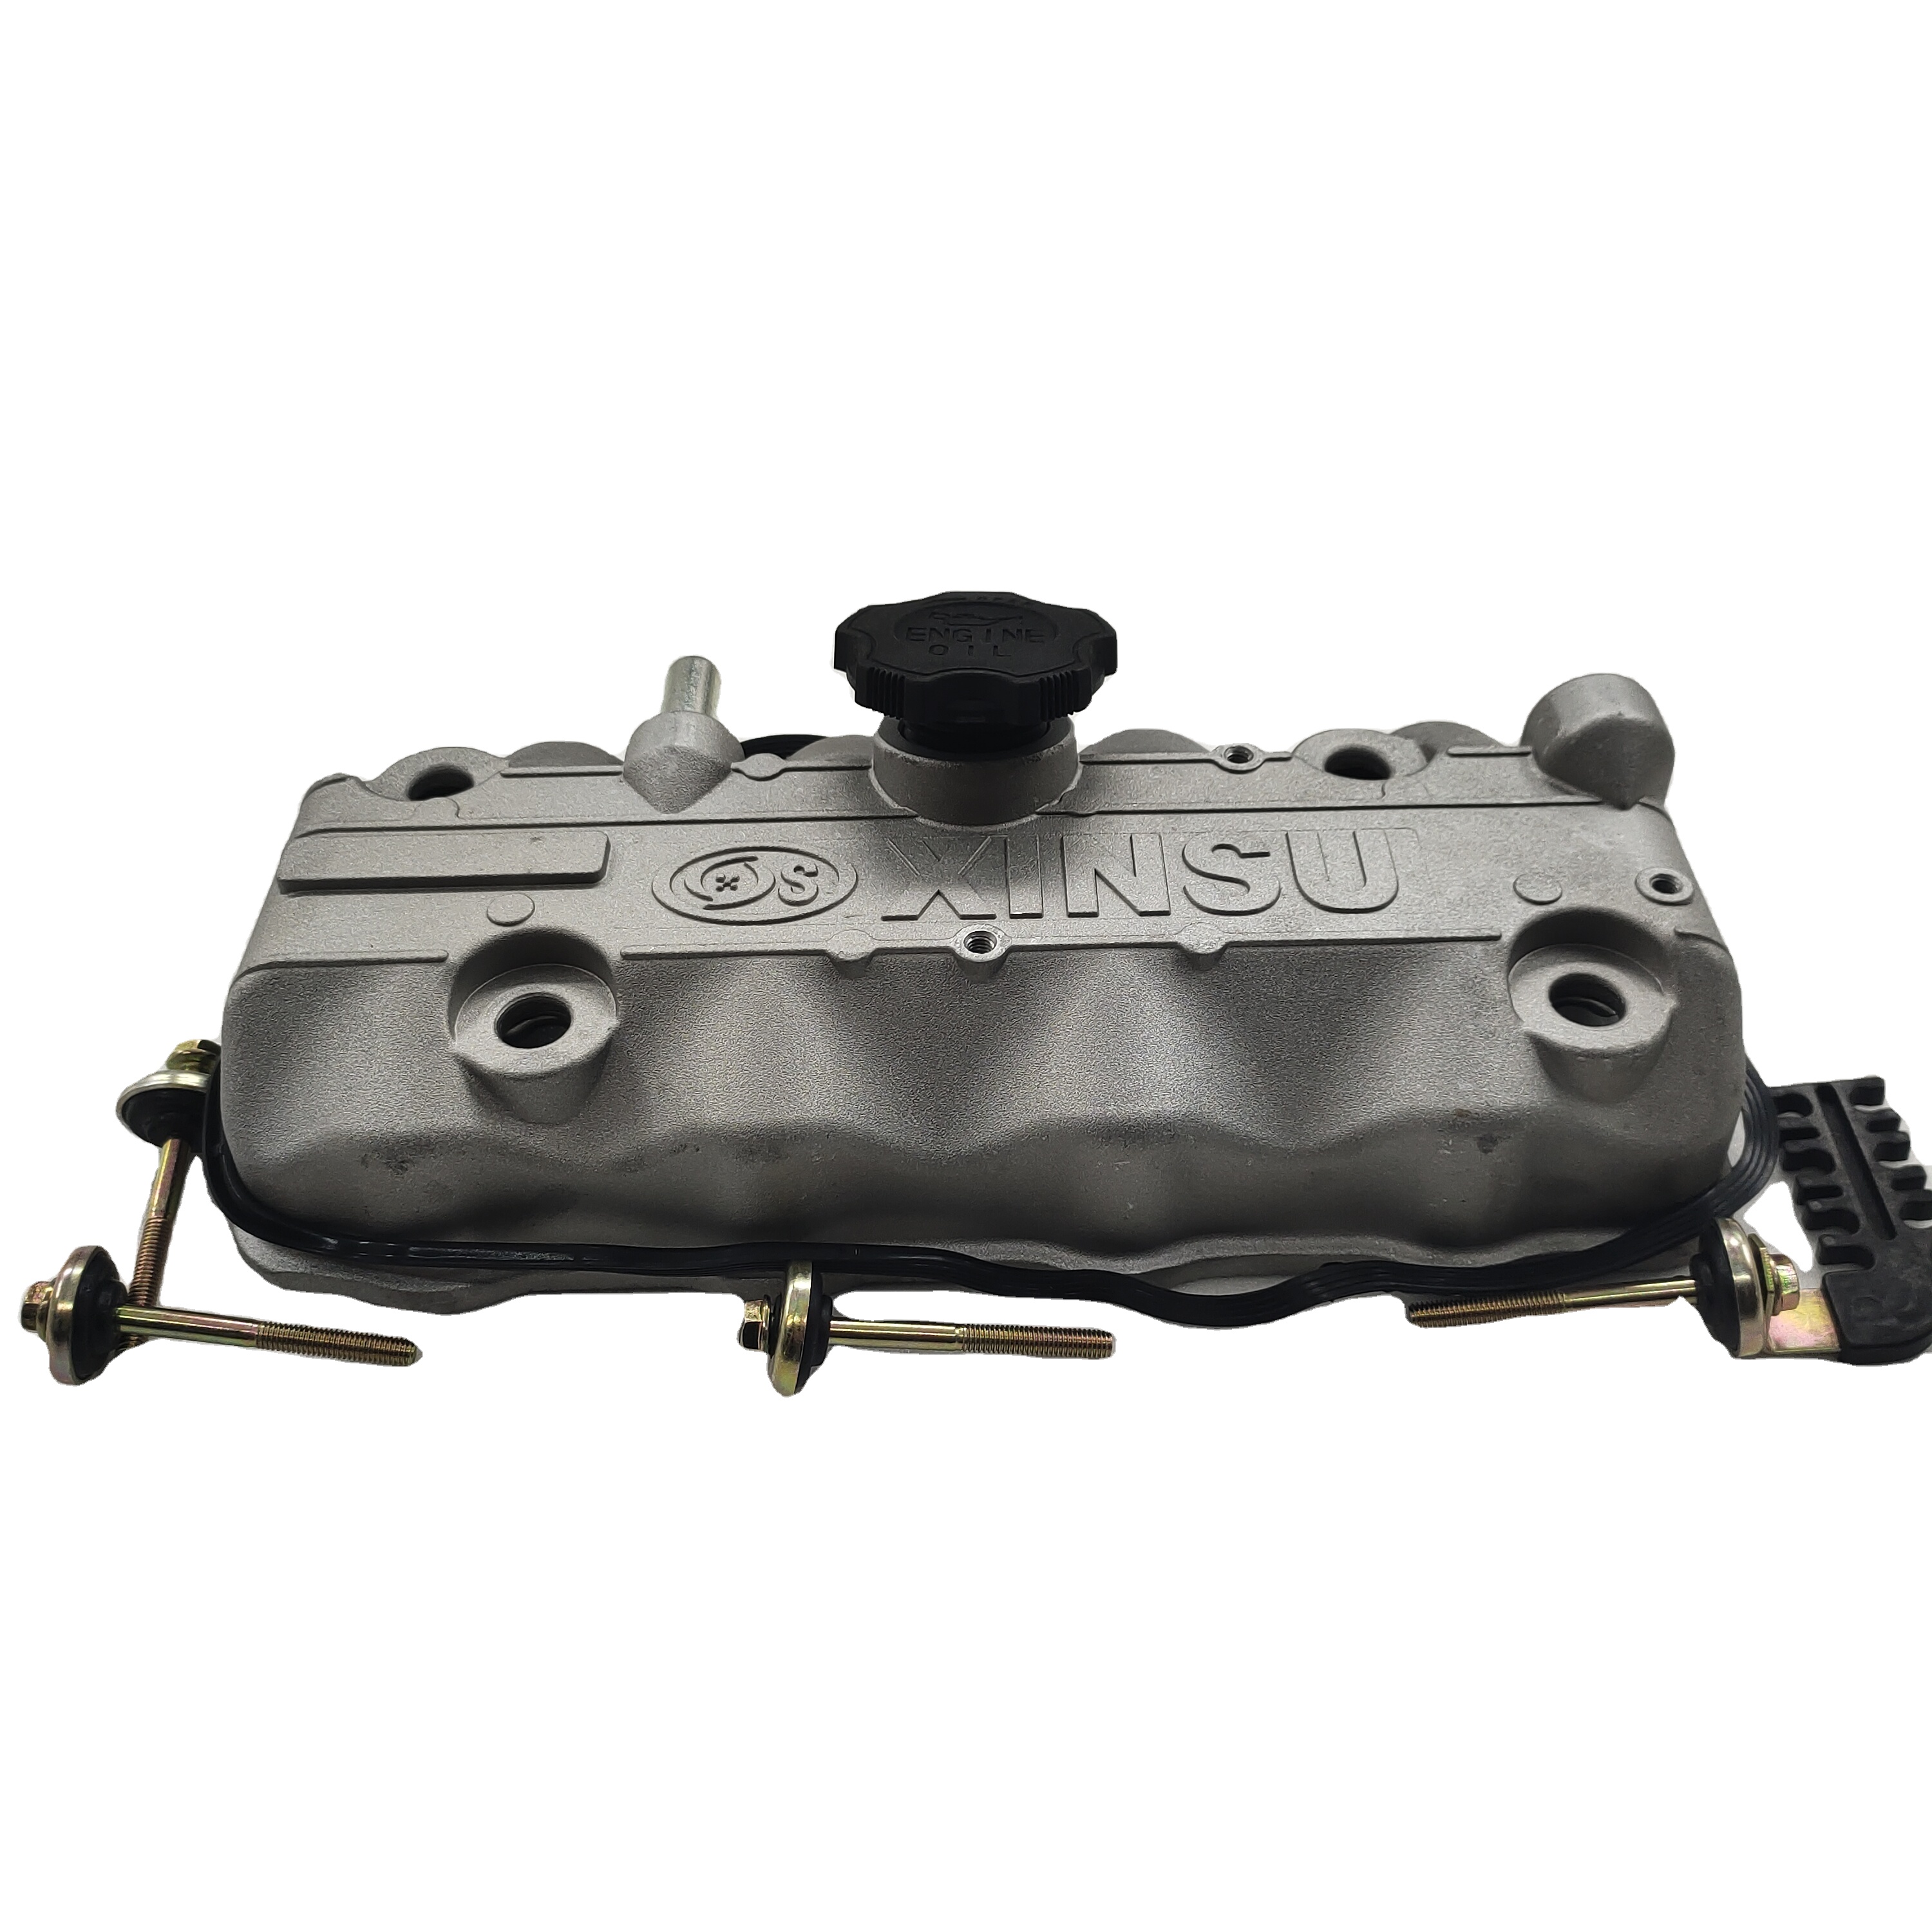 motorcycle 800cc engine Auto engine Cylinder head cover valve  chamber tricycle engine parts high quality factory direct sale